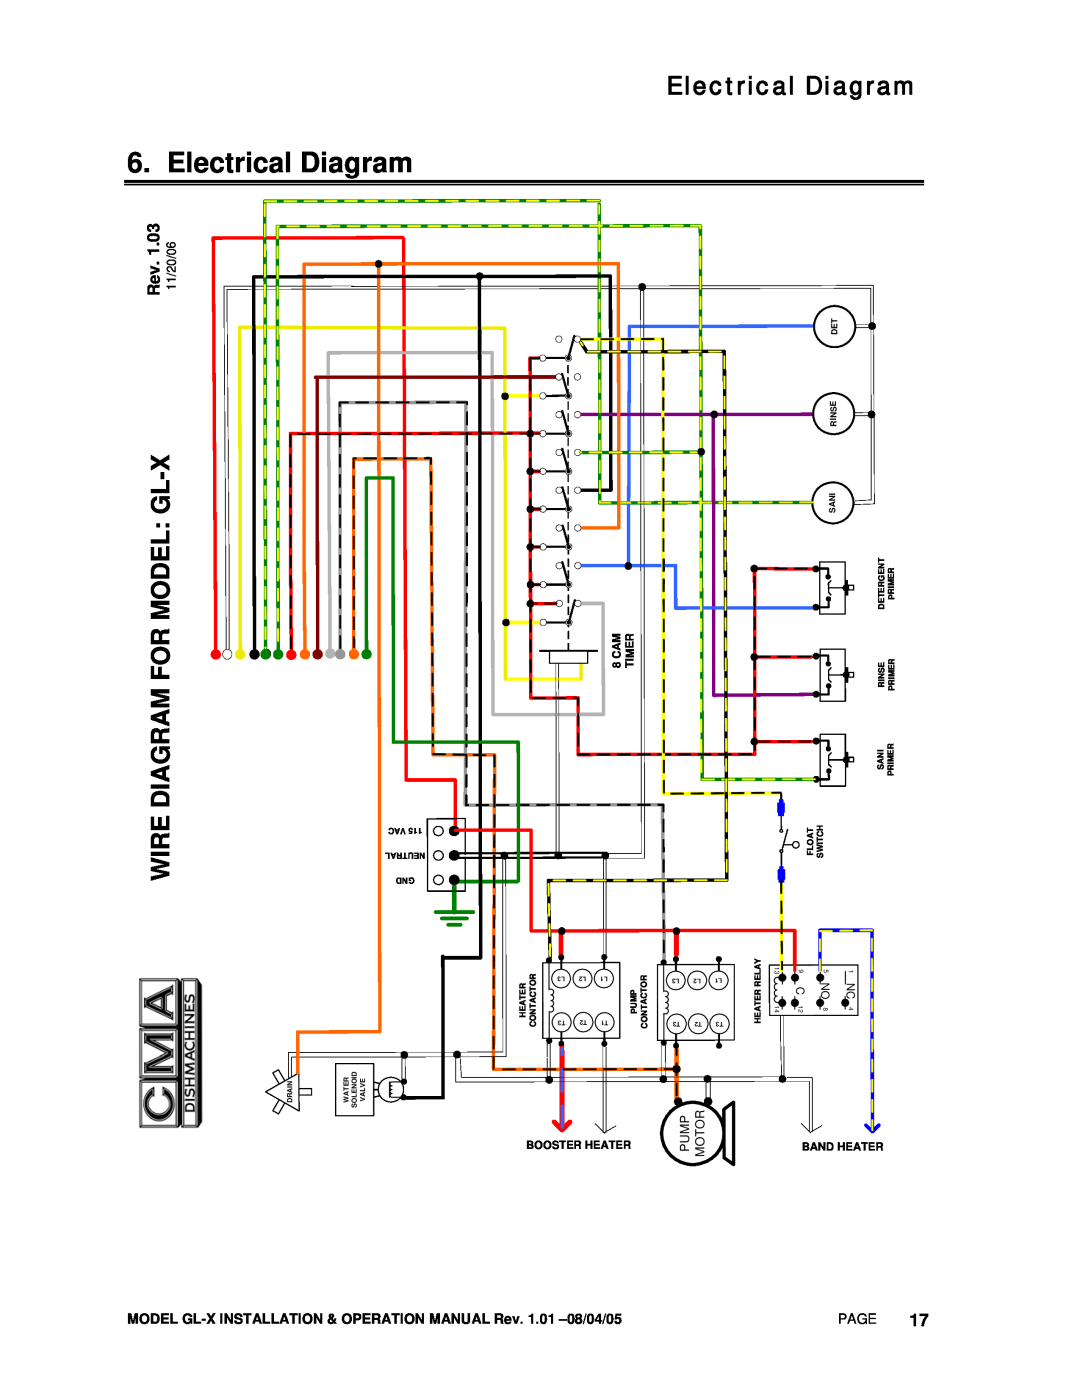 CMA Dishmachines GL-X Electrical Diagram, Wire Diagram For Model Gl-X, Booster Heater, Band Heater, 8IT CM MARE, Es Re 